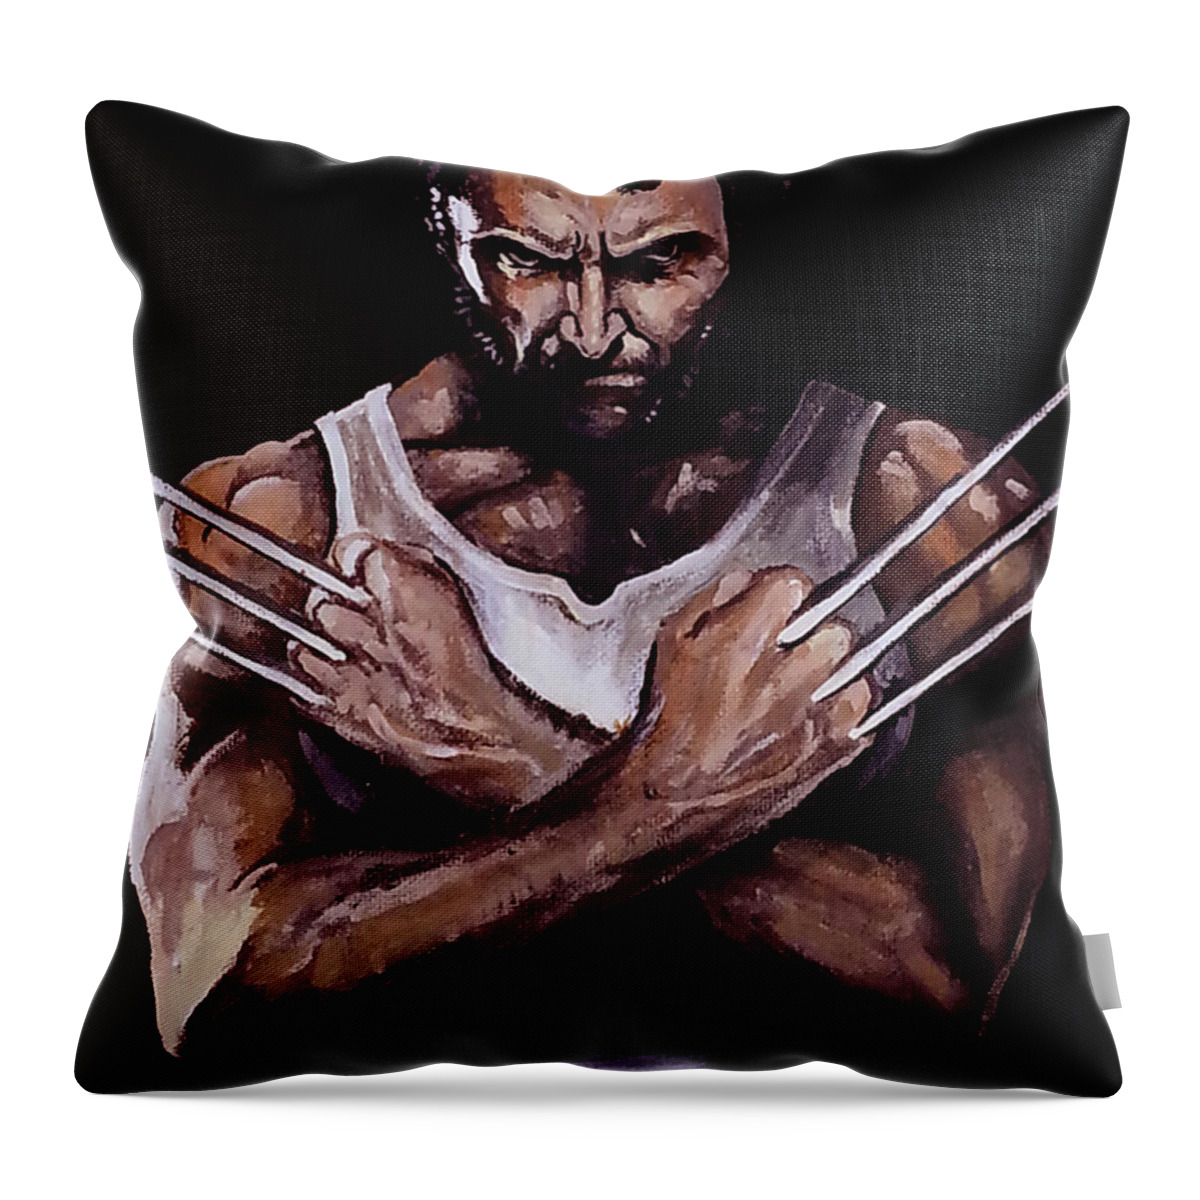 Hugh Jackman Throw Pillow featuring the painting Wolverine by Tom Carlton